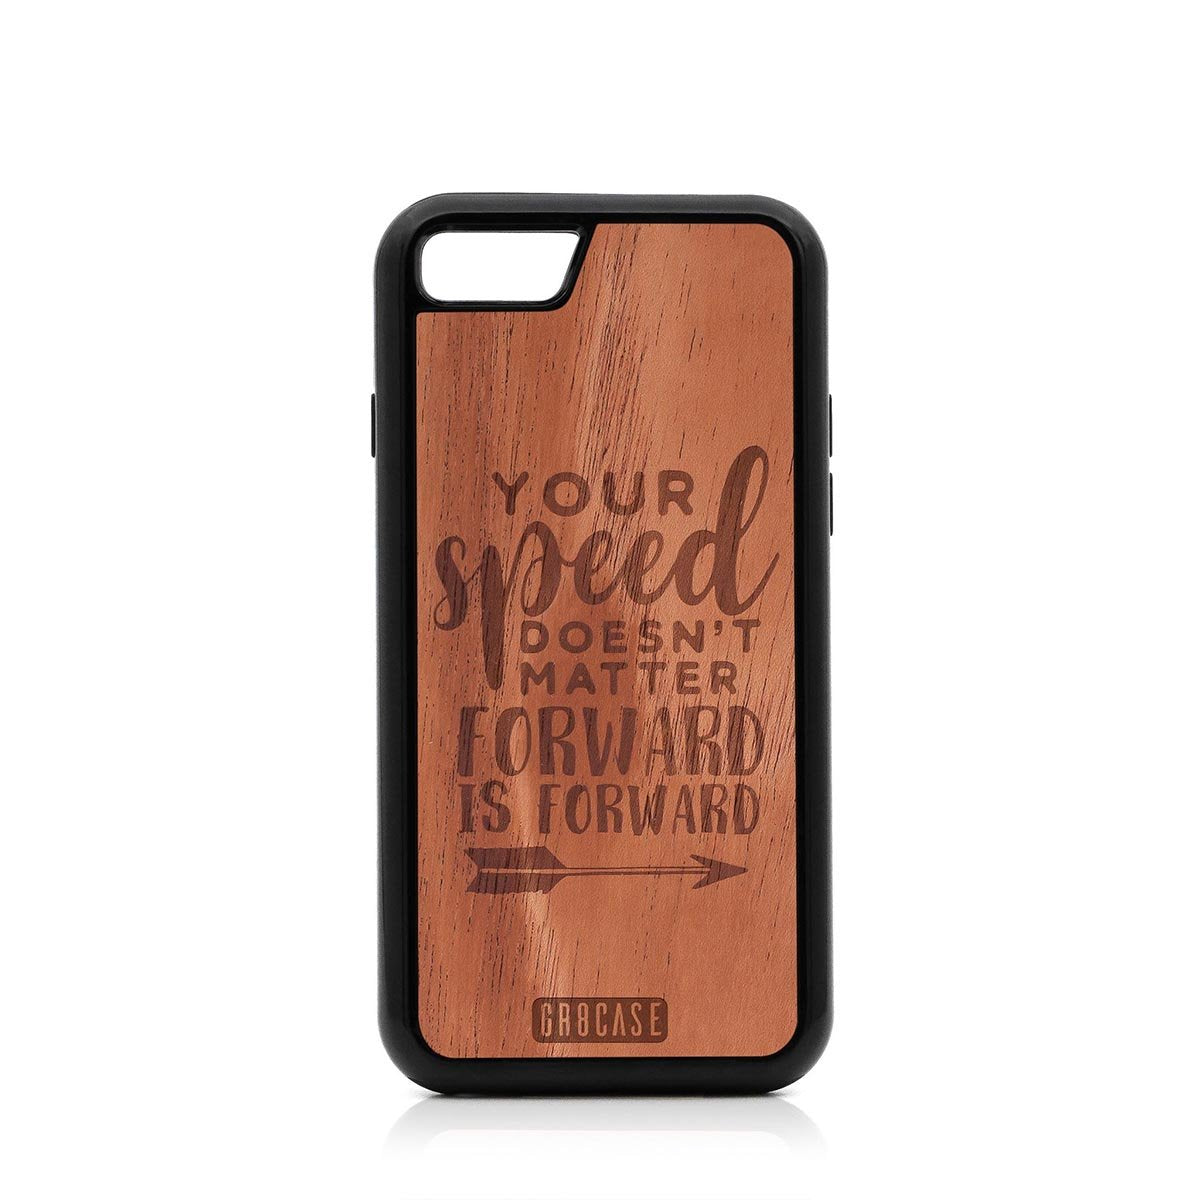 Your Speed Doesn't Matter Forward Is Forward Design Wood Case For iPhone SE 2020